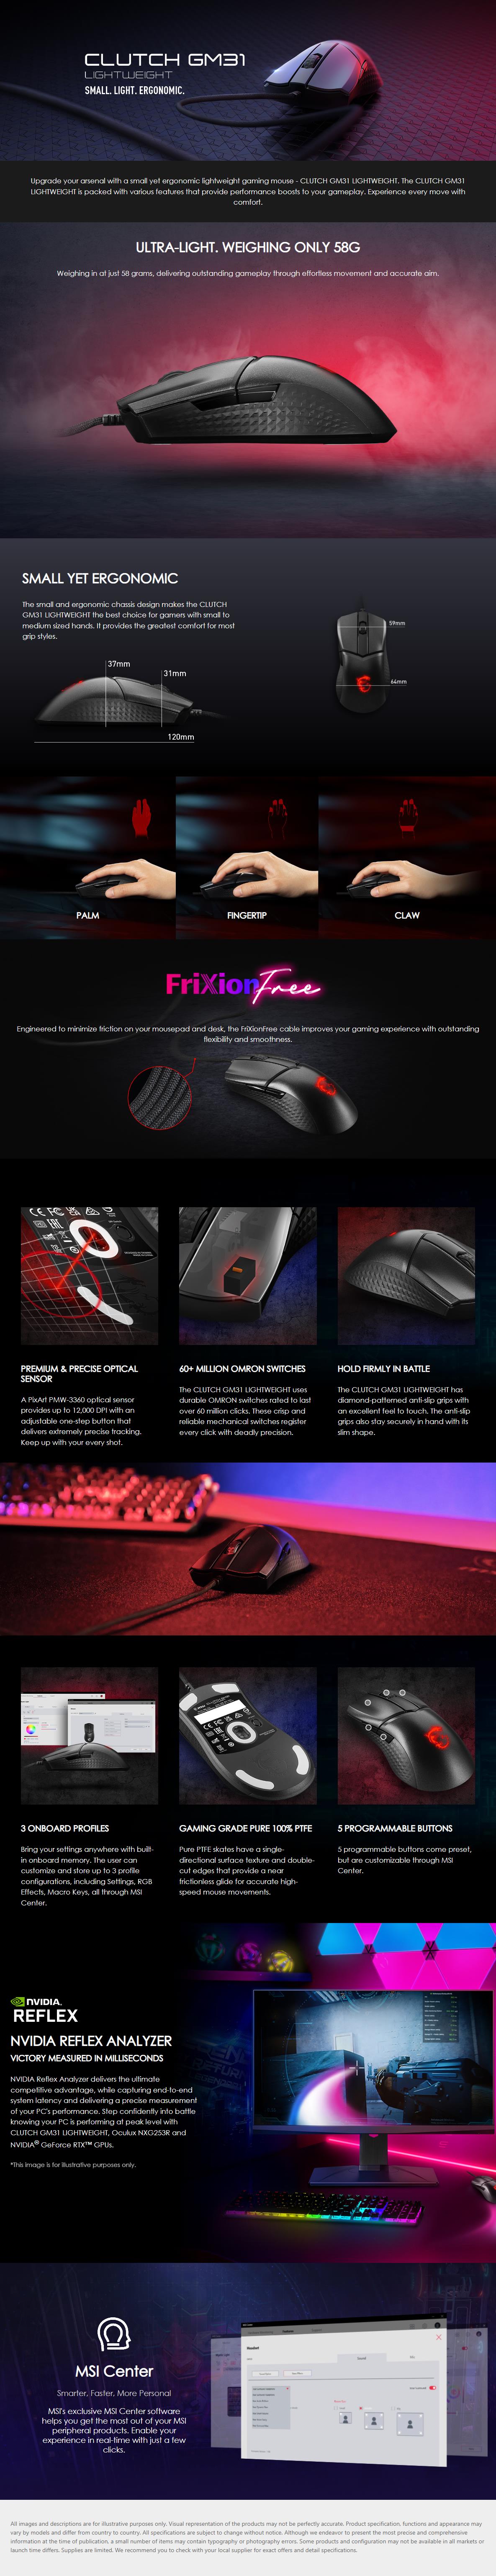 A large marketing image providing additional information about the product MSI Clutch GM31 Lightweight Gaming Mouse - Additional alt info not provided